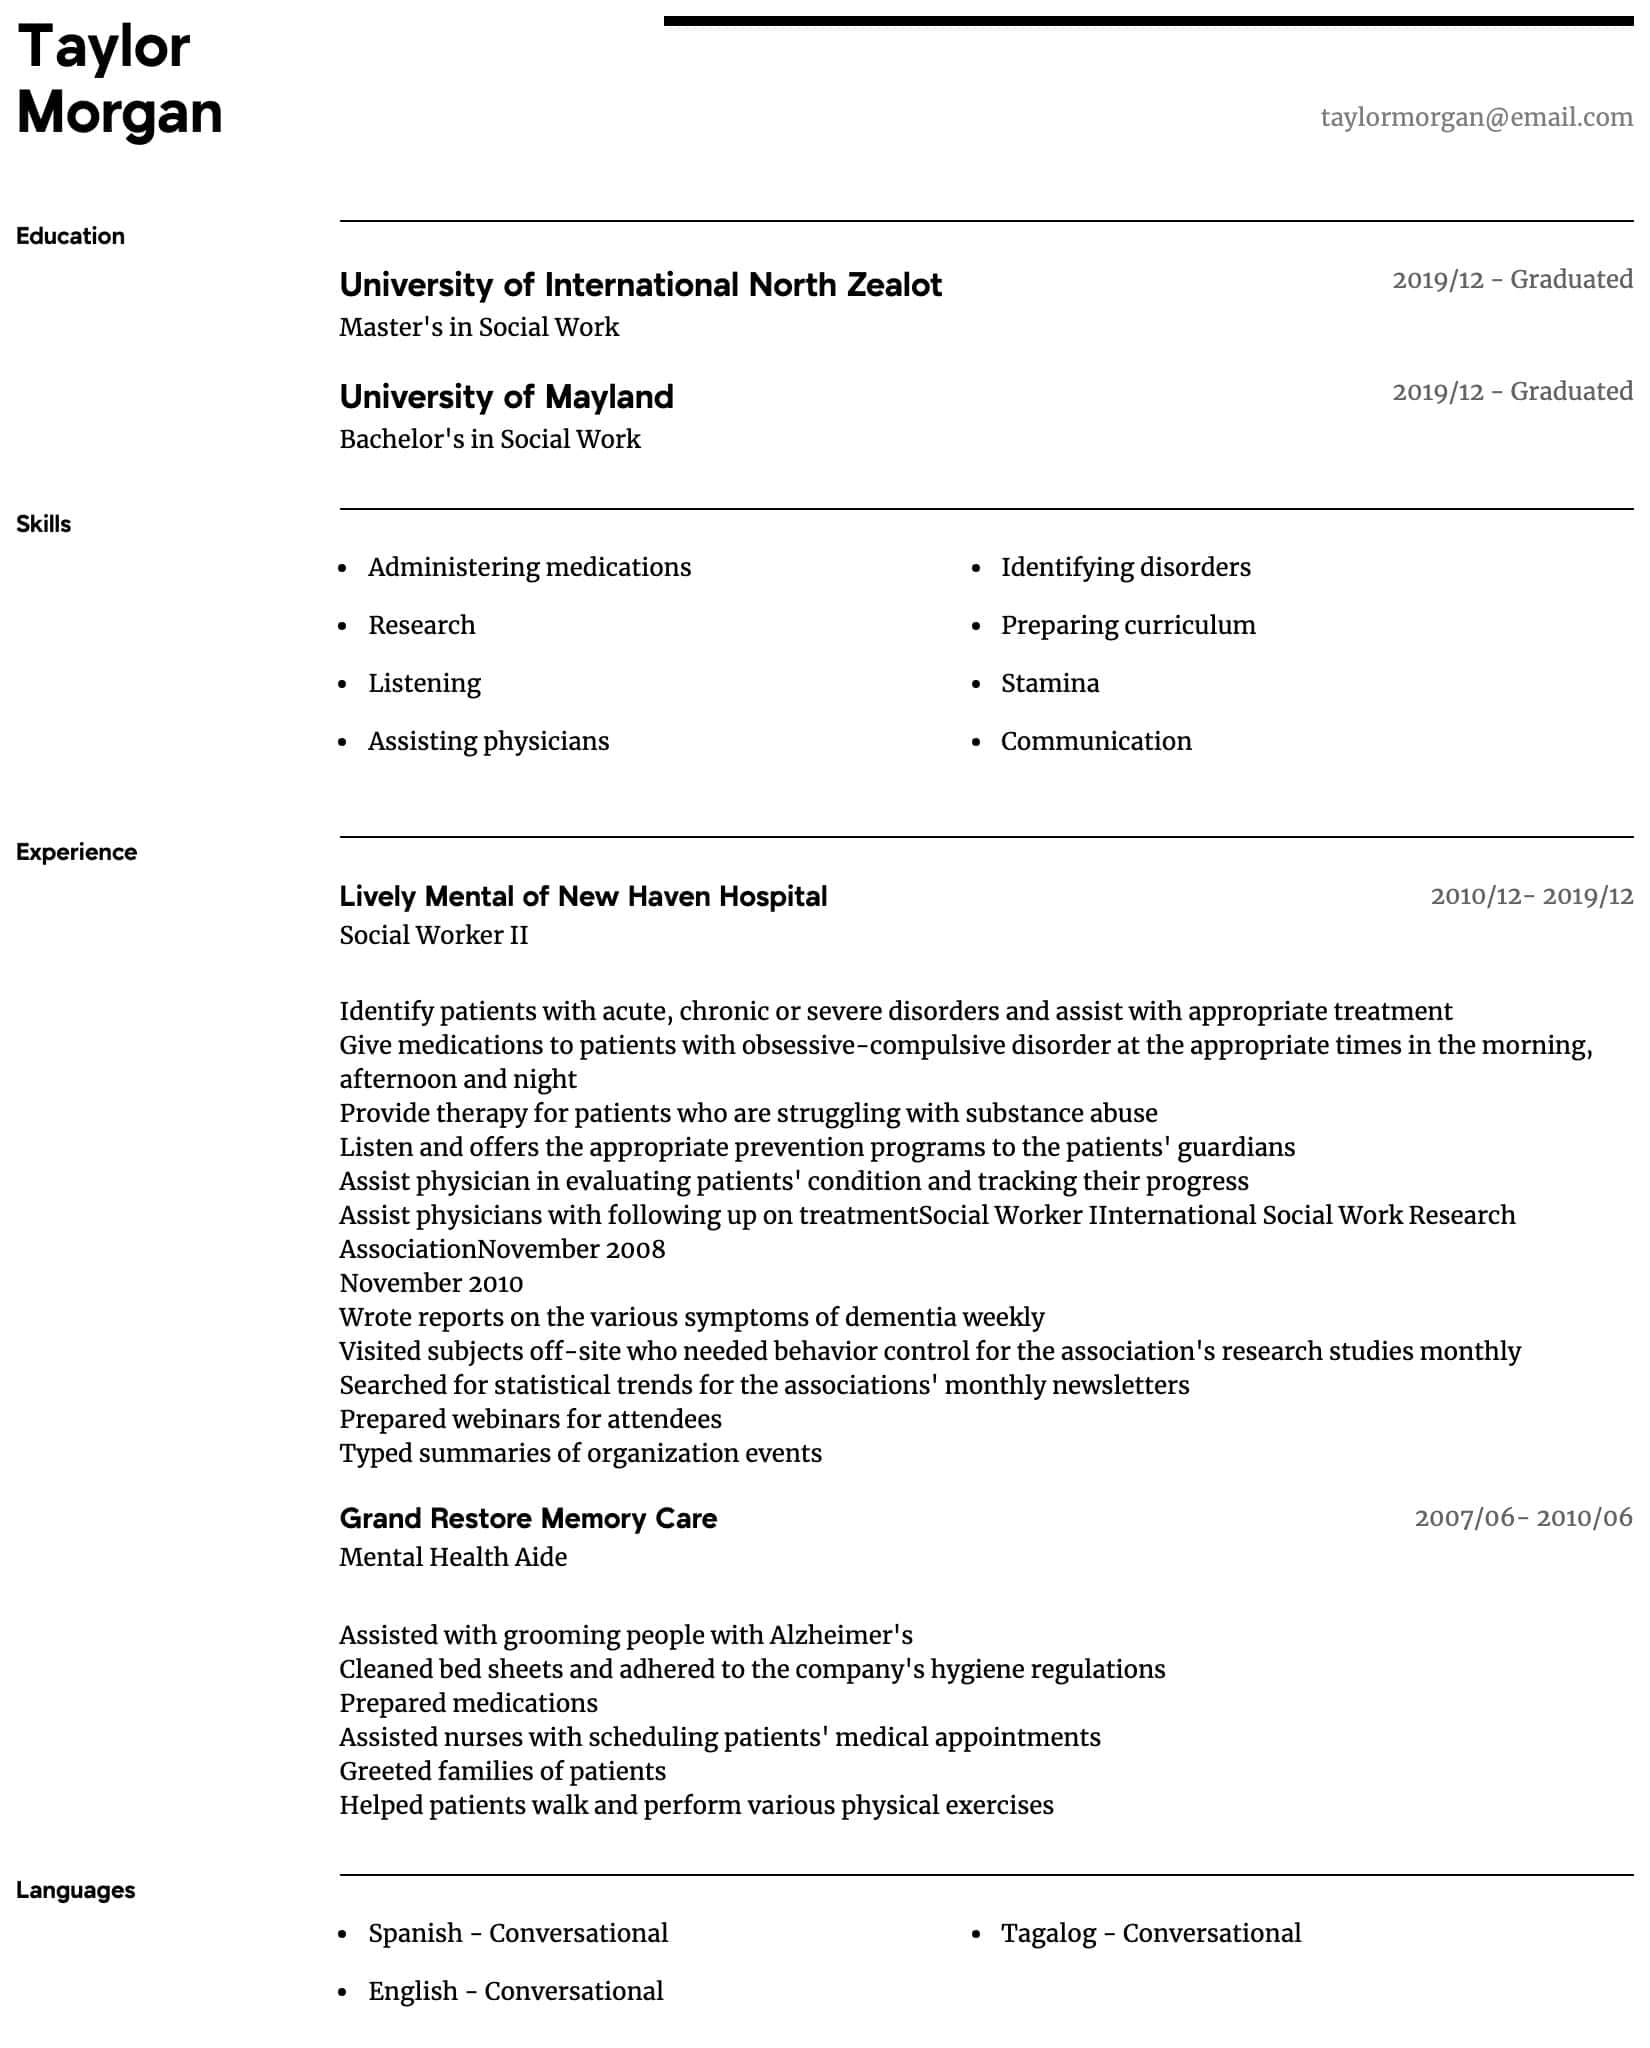 Resume Examples For Social Workers